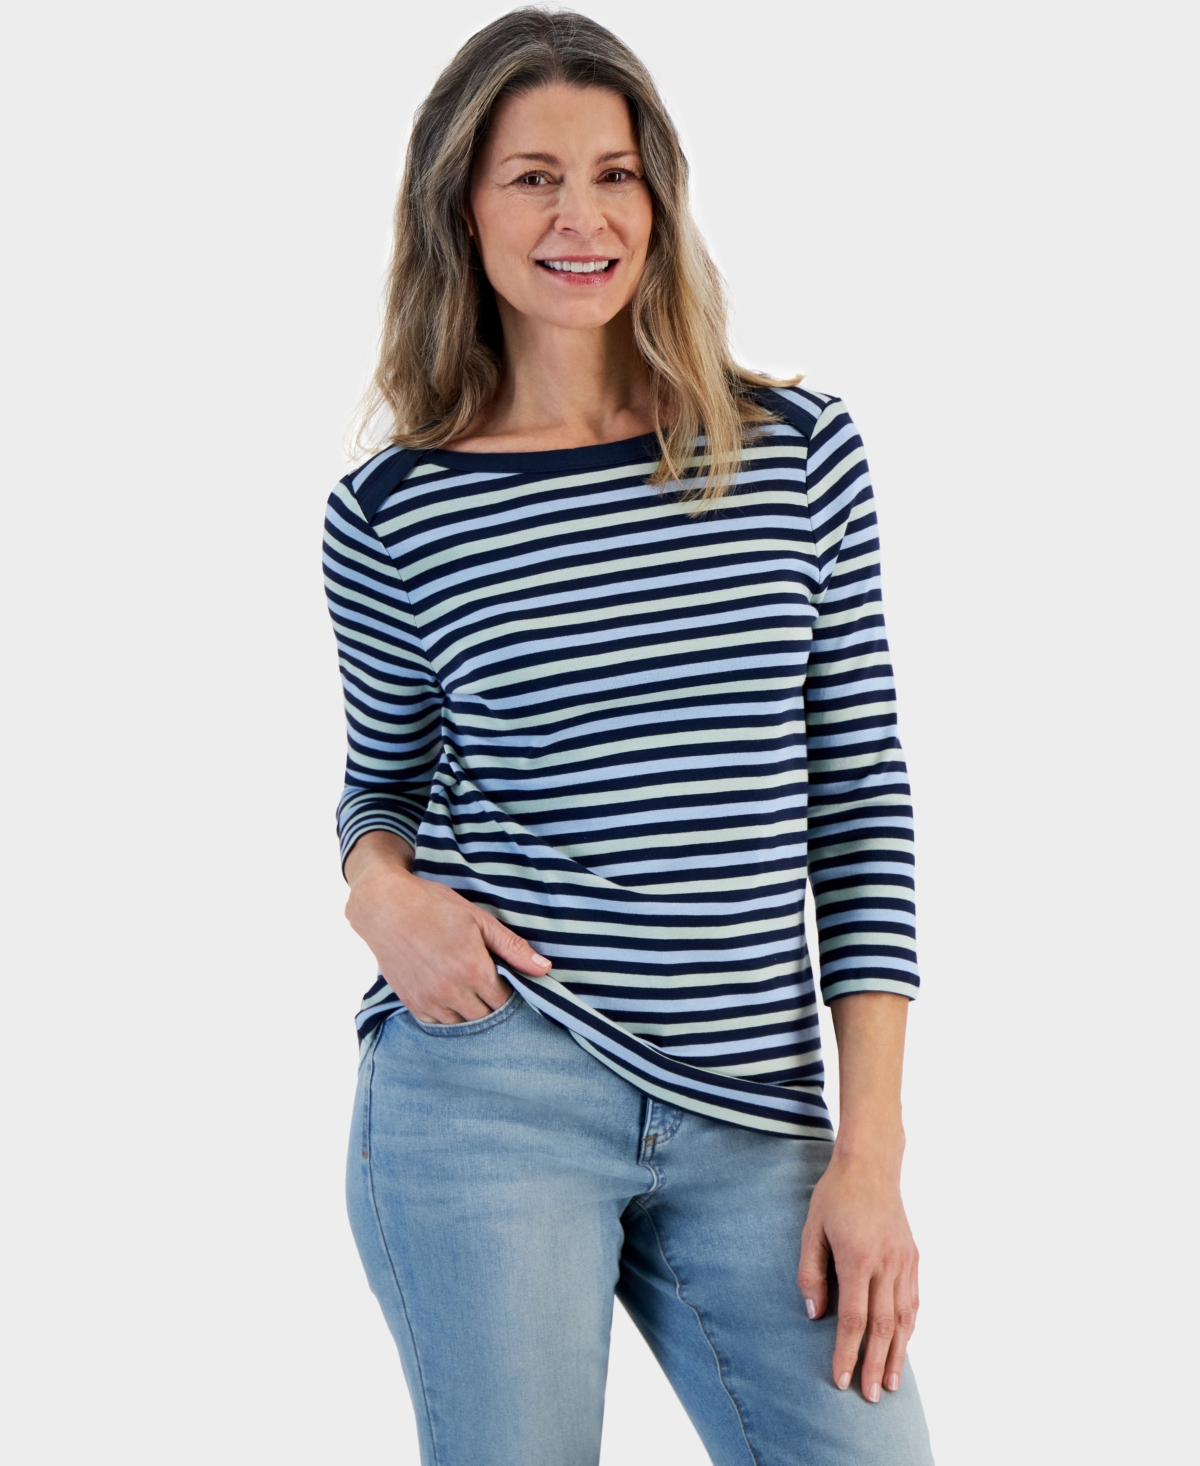 Petite Valerie Striped 3/4-Sleeve Boat-Neck Top, Created for Macy's - Stripe Industrial Blue